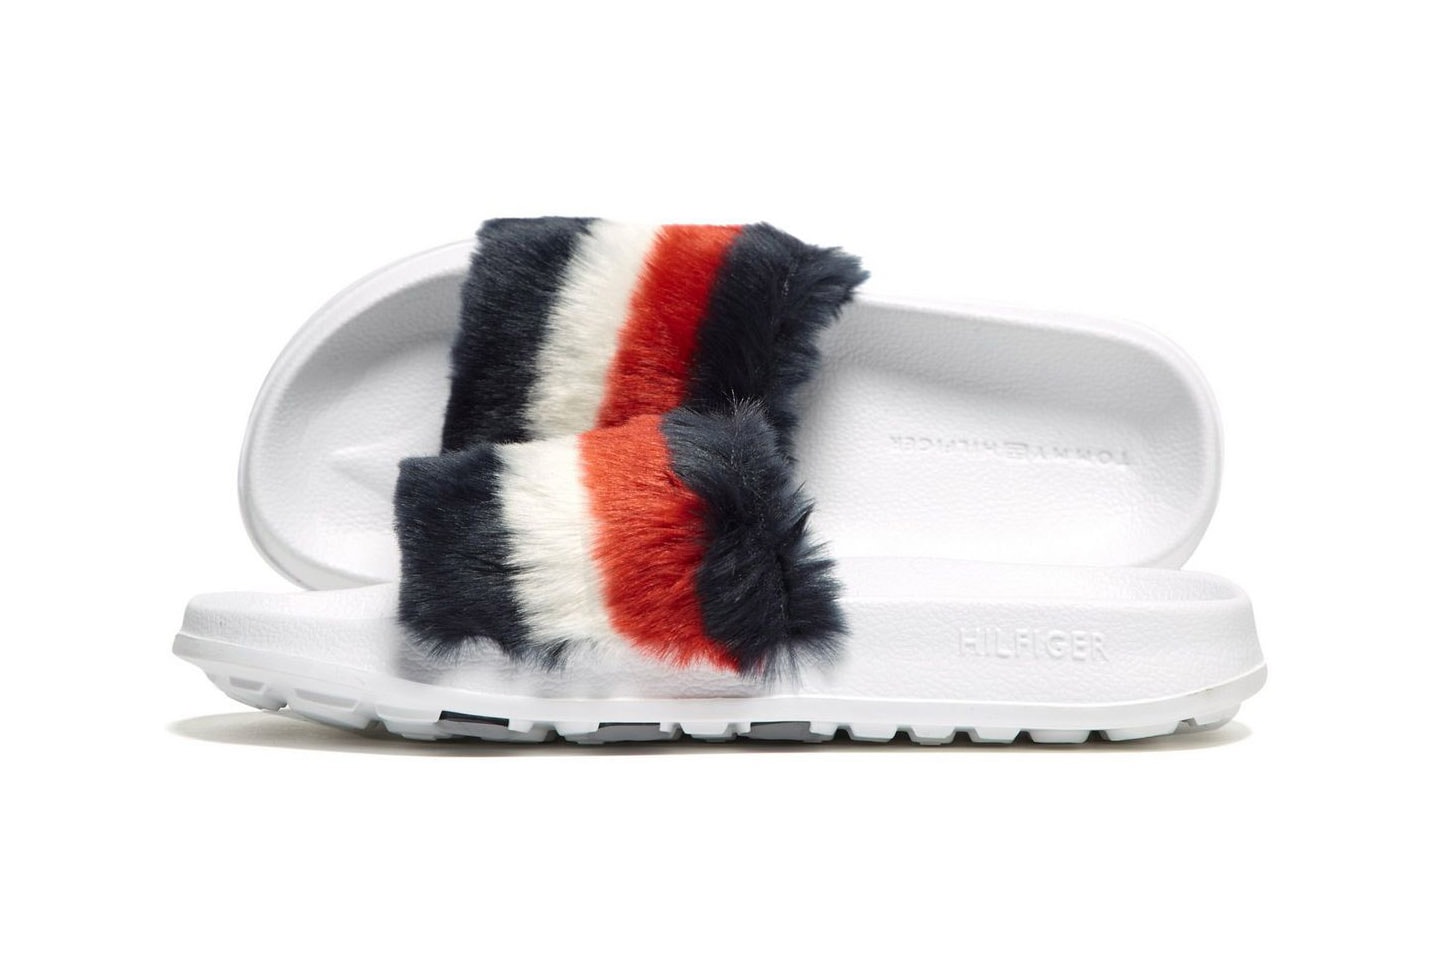 Tommy Hilfiger fluffy furry fuzzy mae lo slides sandals slip-ons summer footwear where to buy JD Sports